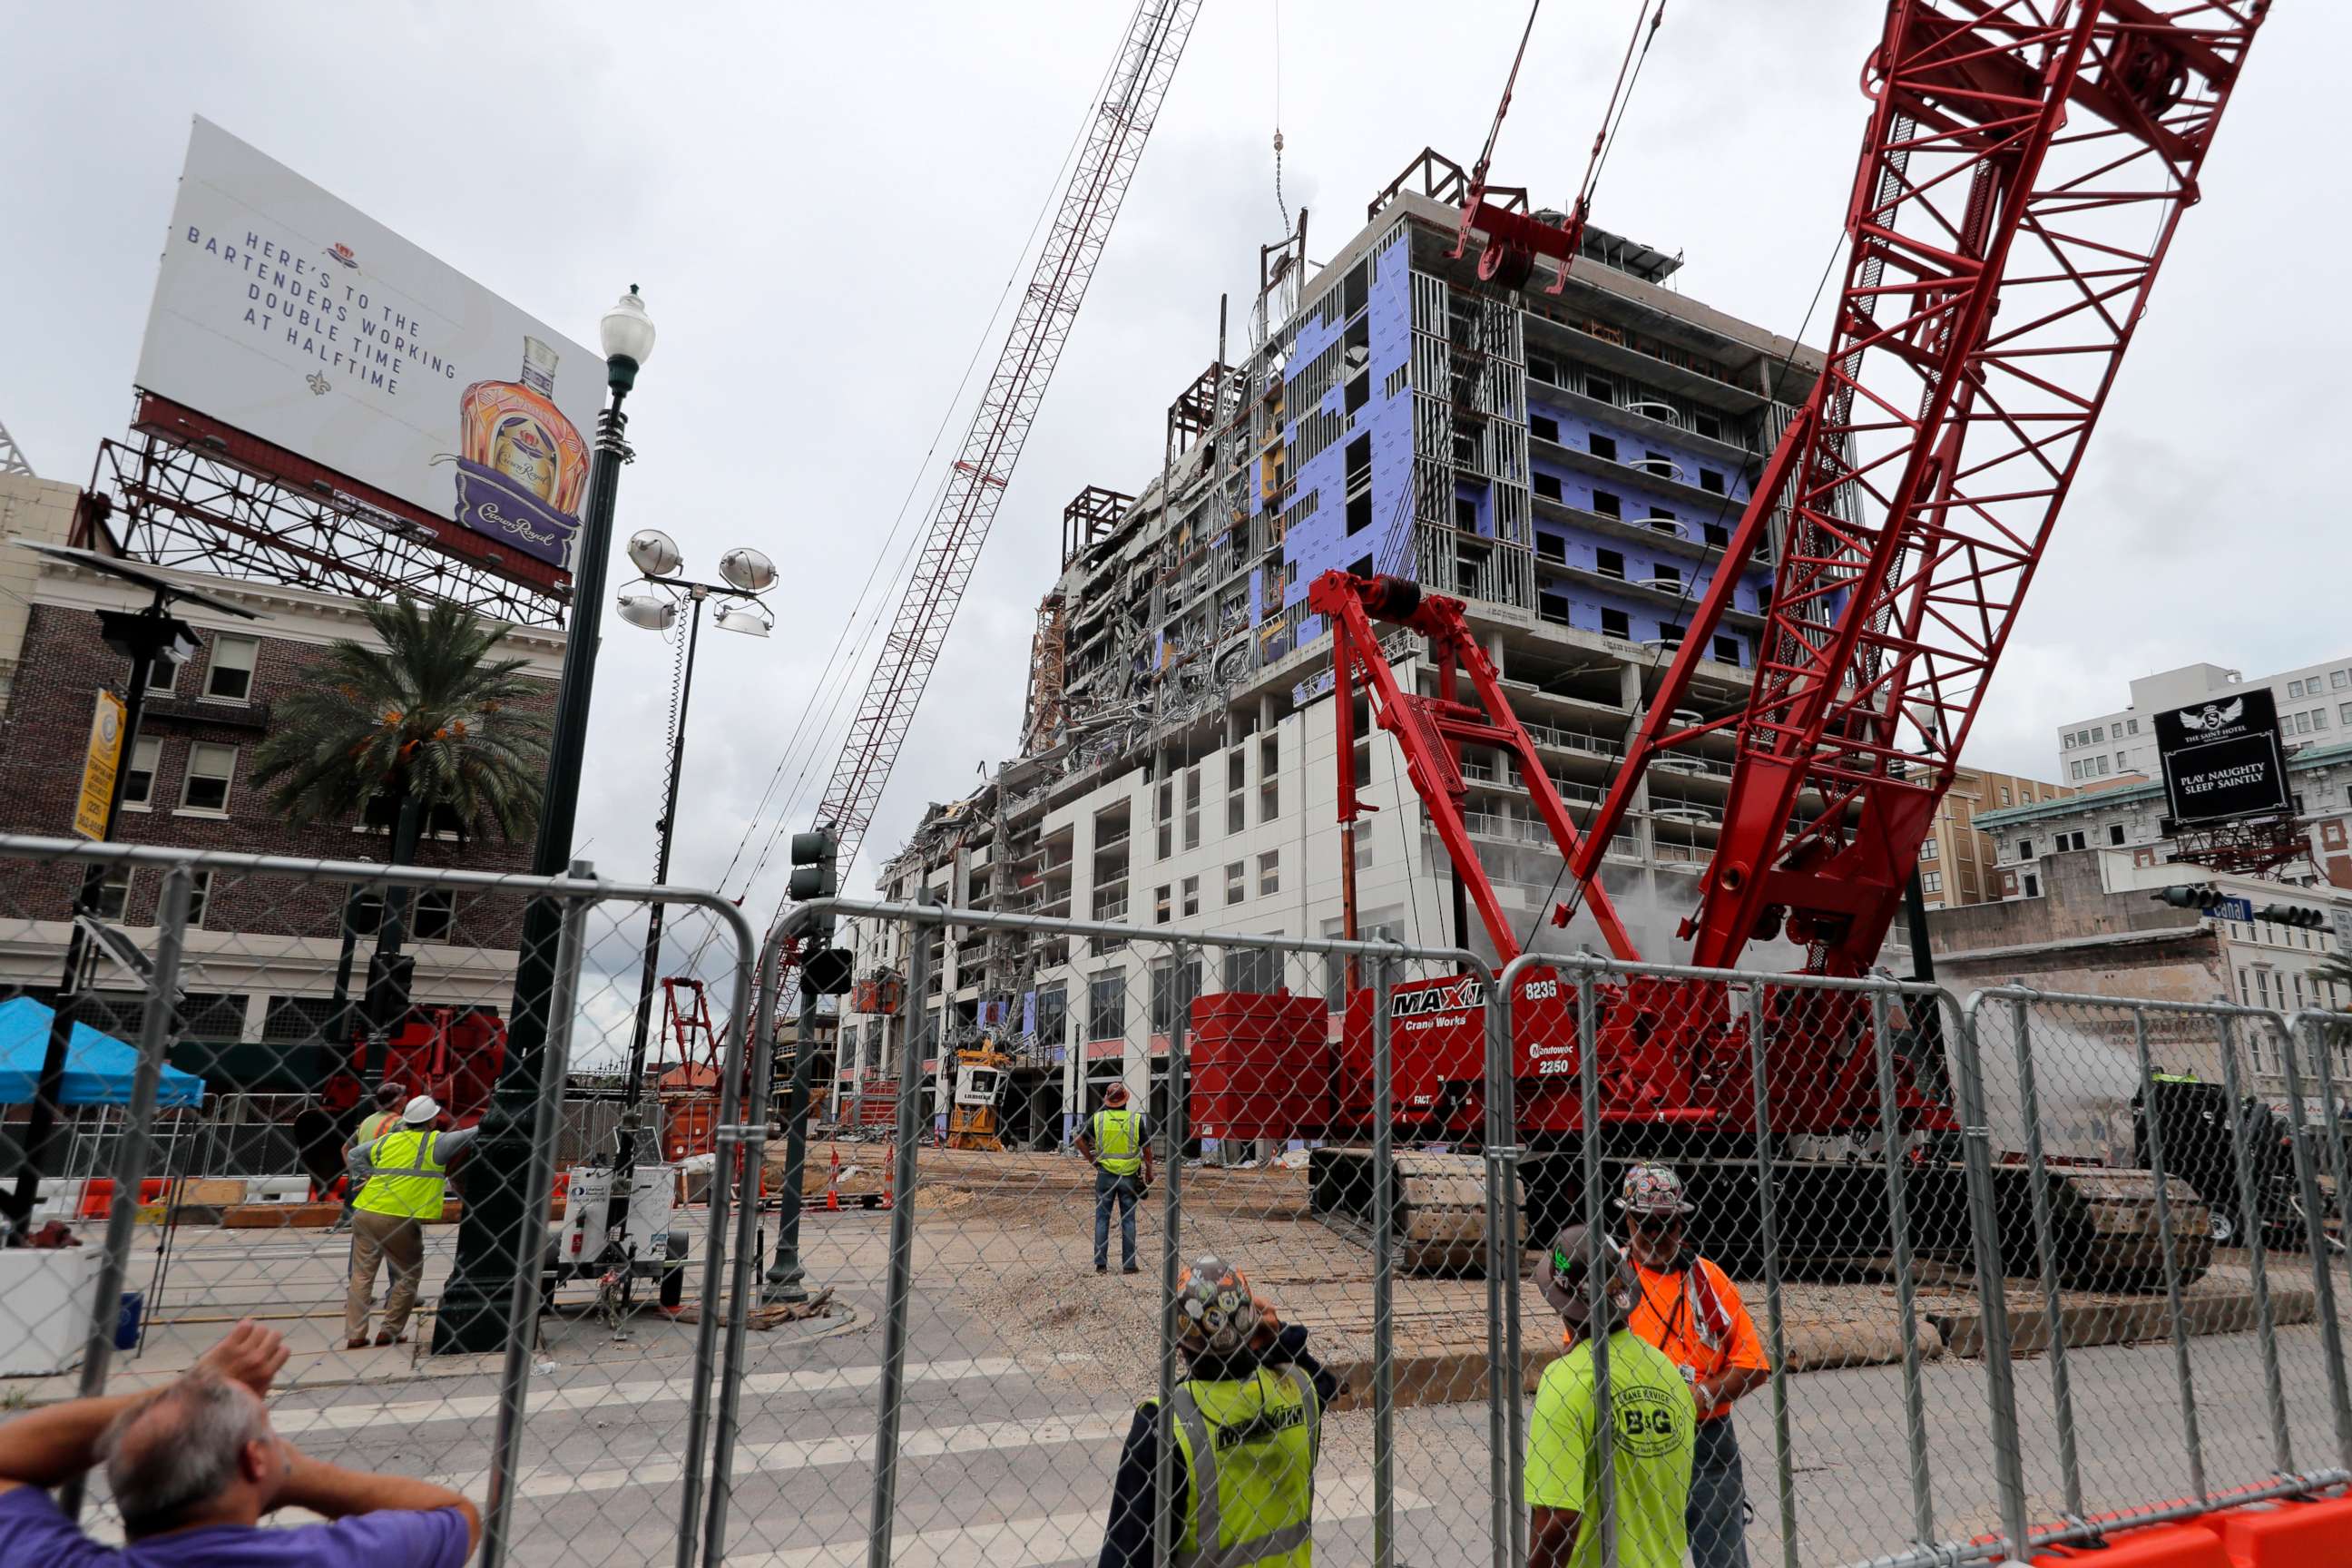 PHOTO: Workers watch as a wrecking ball knocks debris loose from the Hard Rock Hotel building collapse site in New Orleans, July 20, 2020.